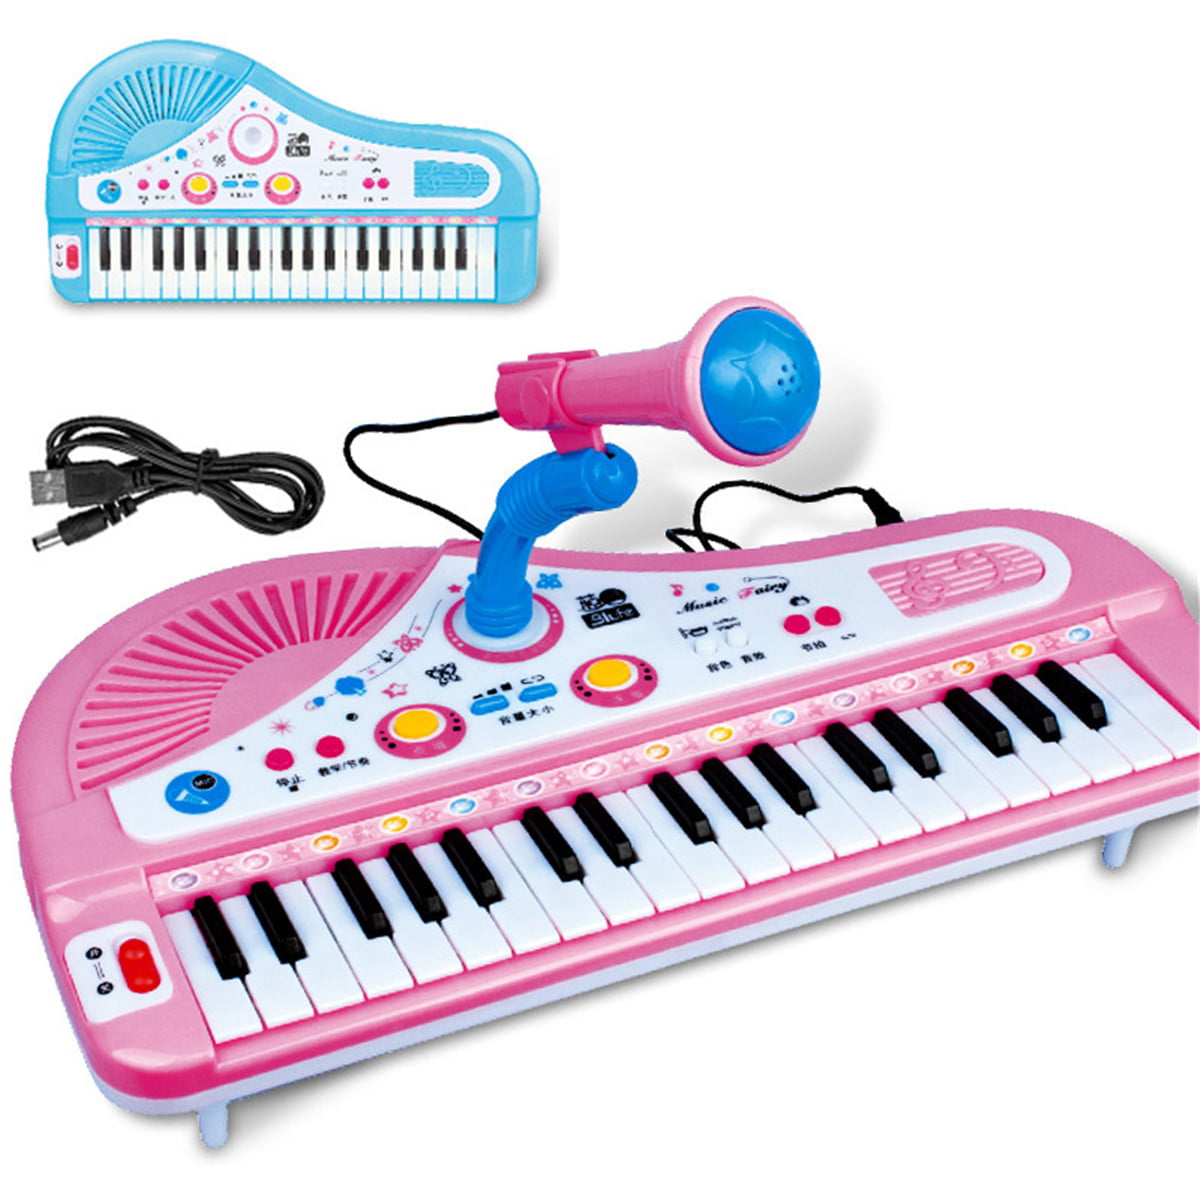 Details about    Electronic 37-Key Toy Piano Keyboard for Kids with Real Working Microphone 